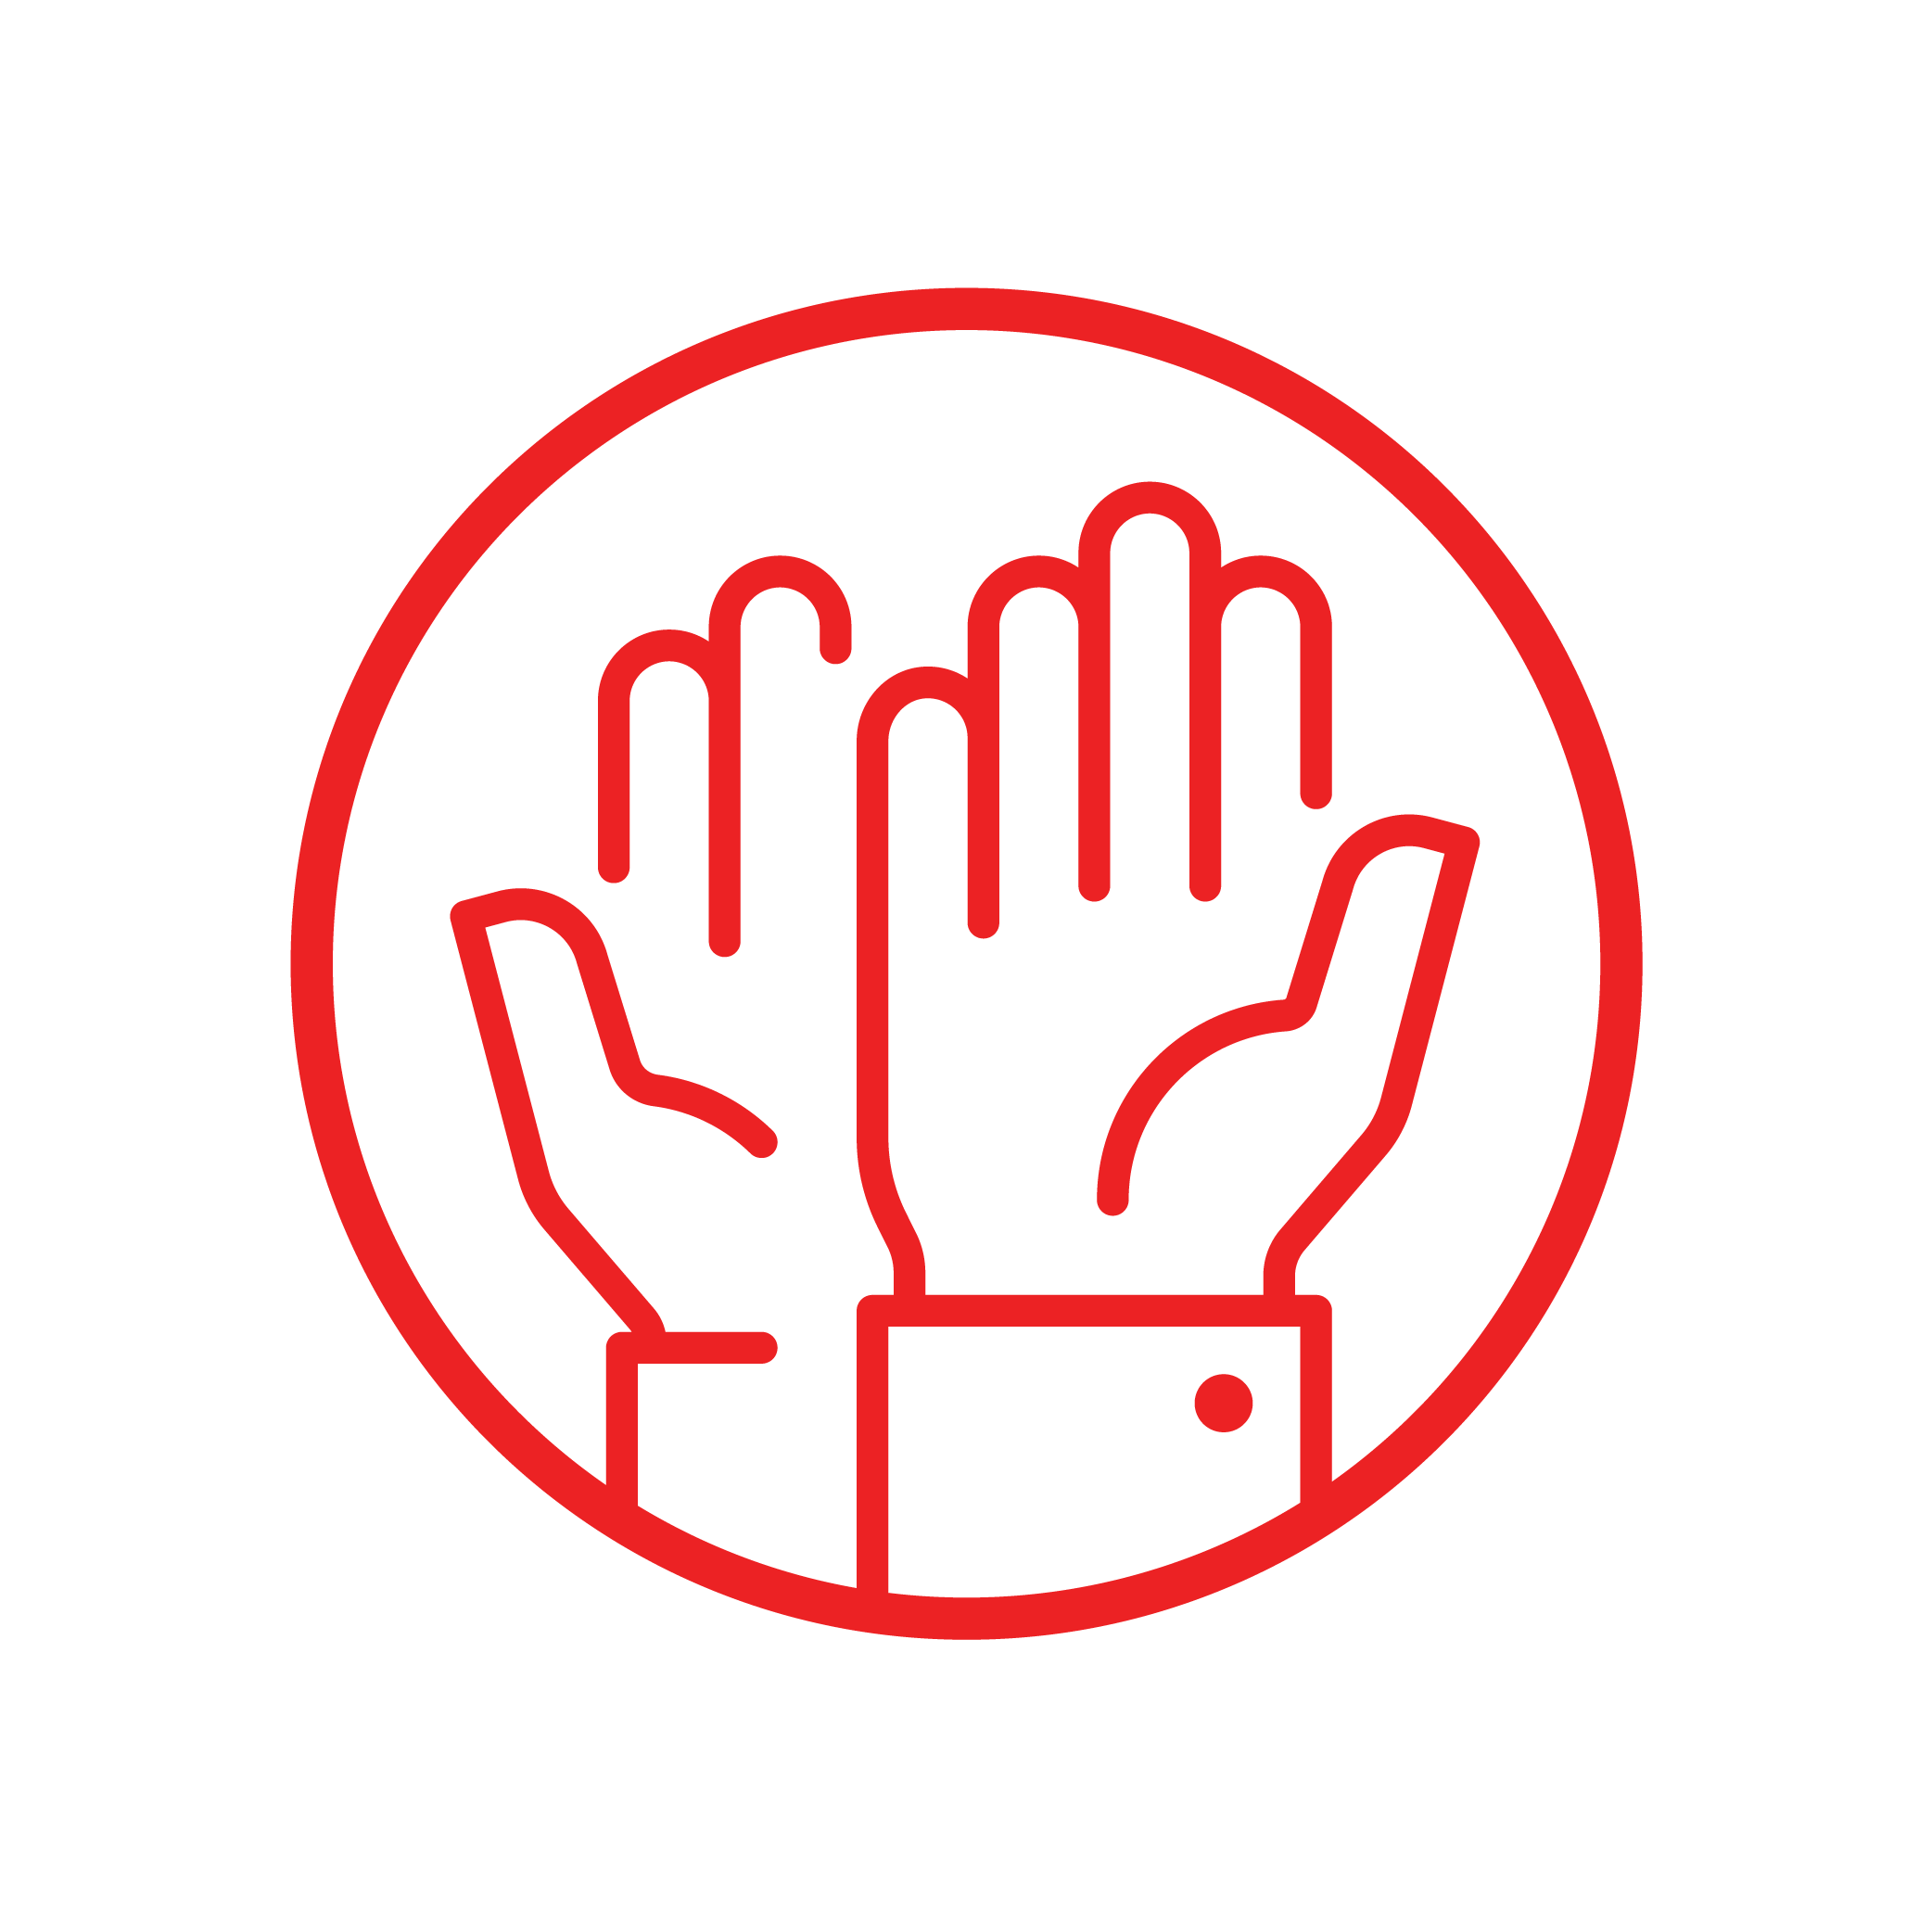 A red and white circle with two hands in it Description automatically generated